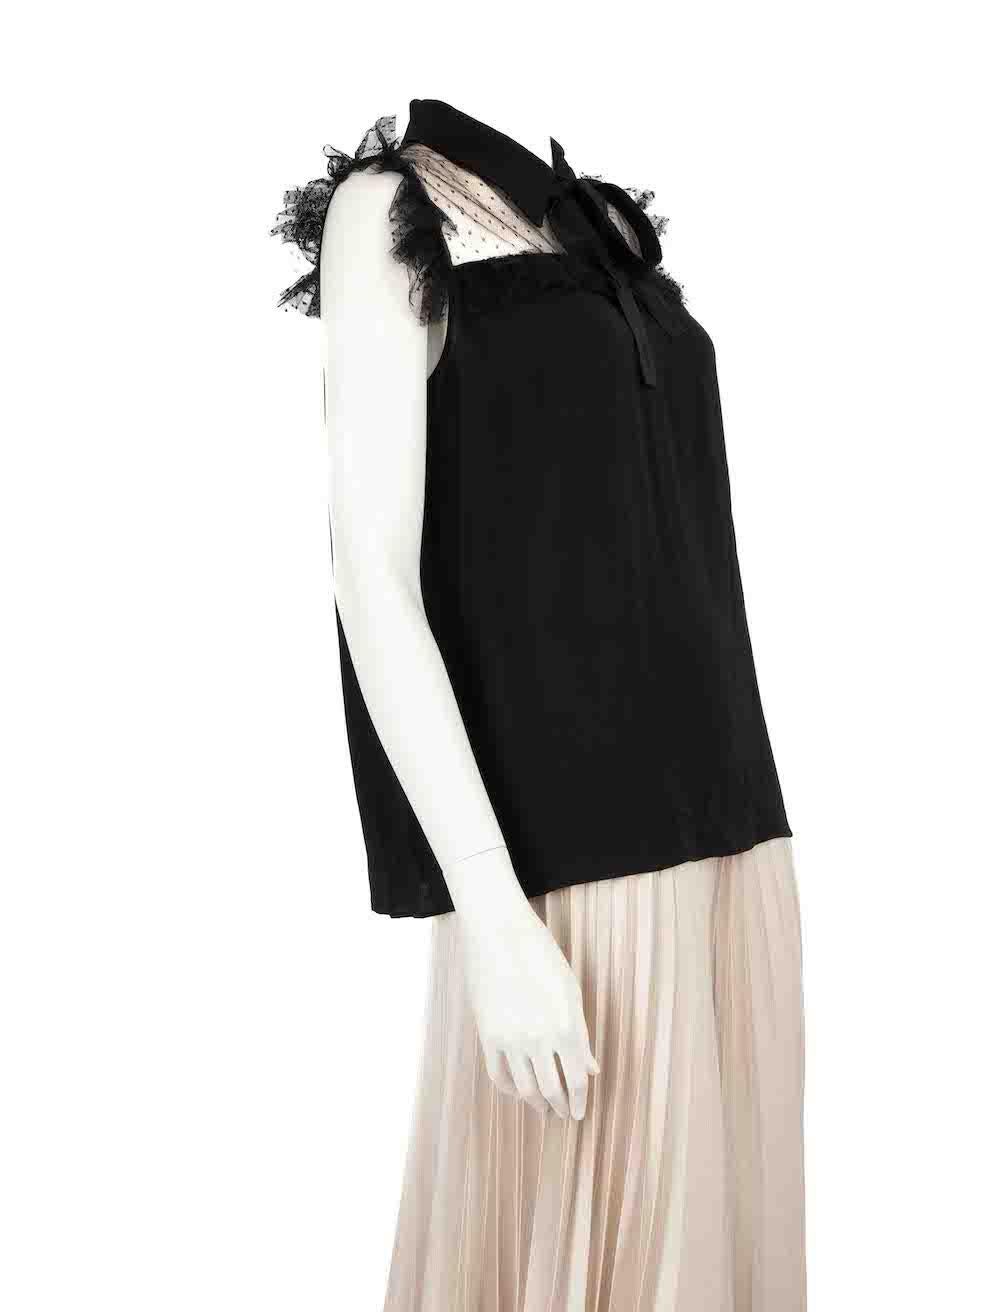 CONDITION is Very good. Hardly any visible wear to top is evident on this used Miu Miu designer resale item.
 
 
 
 Details
 
 
 Black
 
 Viscose
 
 Top
 
 Sleeveless
 
 Sheer lace top panel
 
 Ruffle trim
 
 Neck tie strap
 
 Back button fastening
